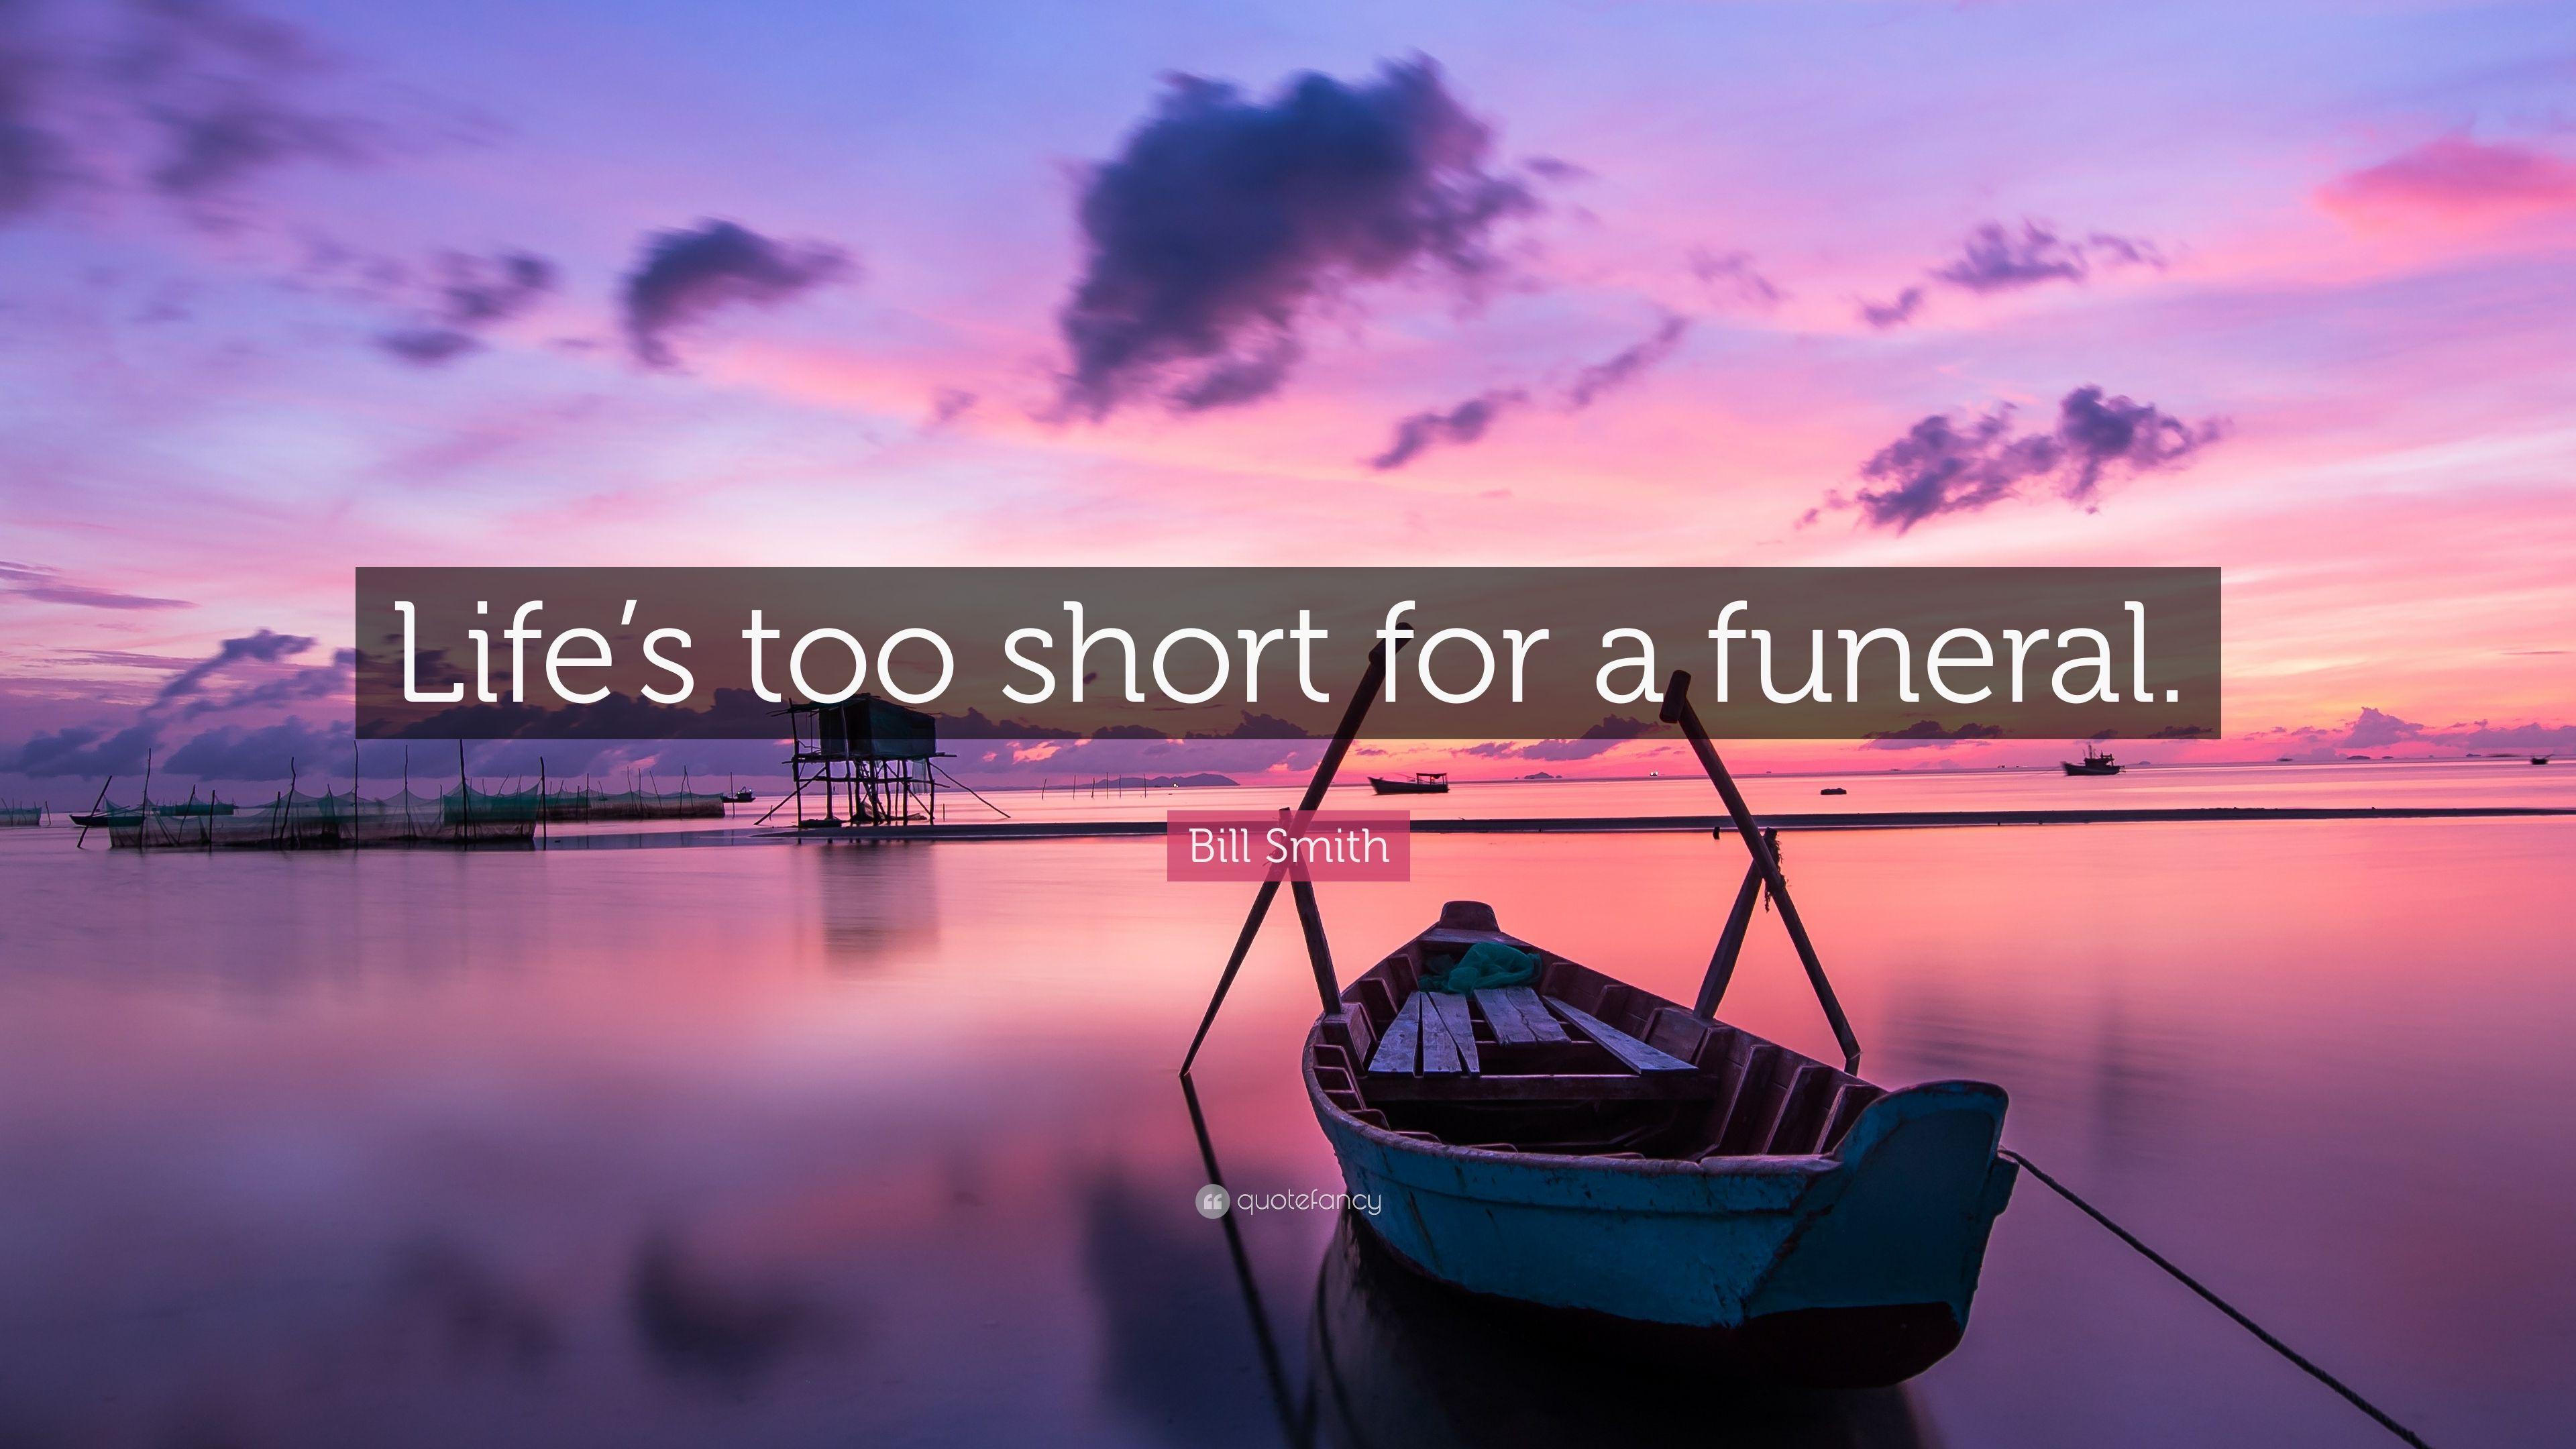 Bill Smith Quote: “Life's too short for a funeral.” 7 wallpaper